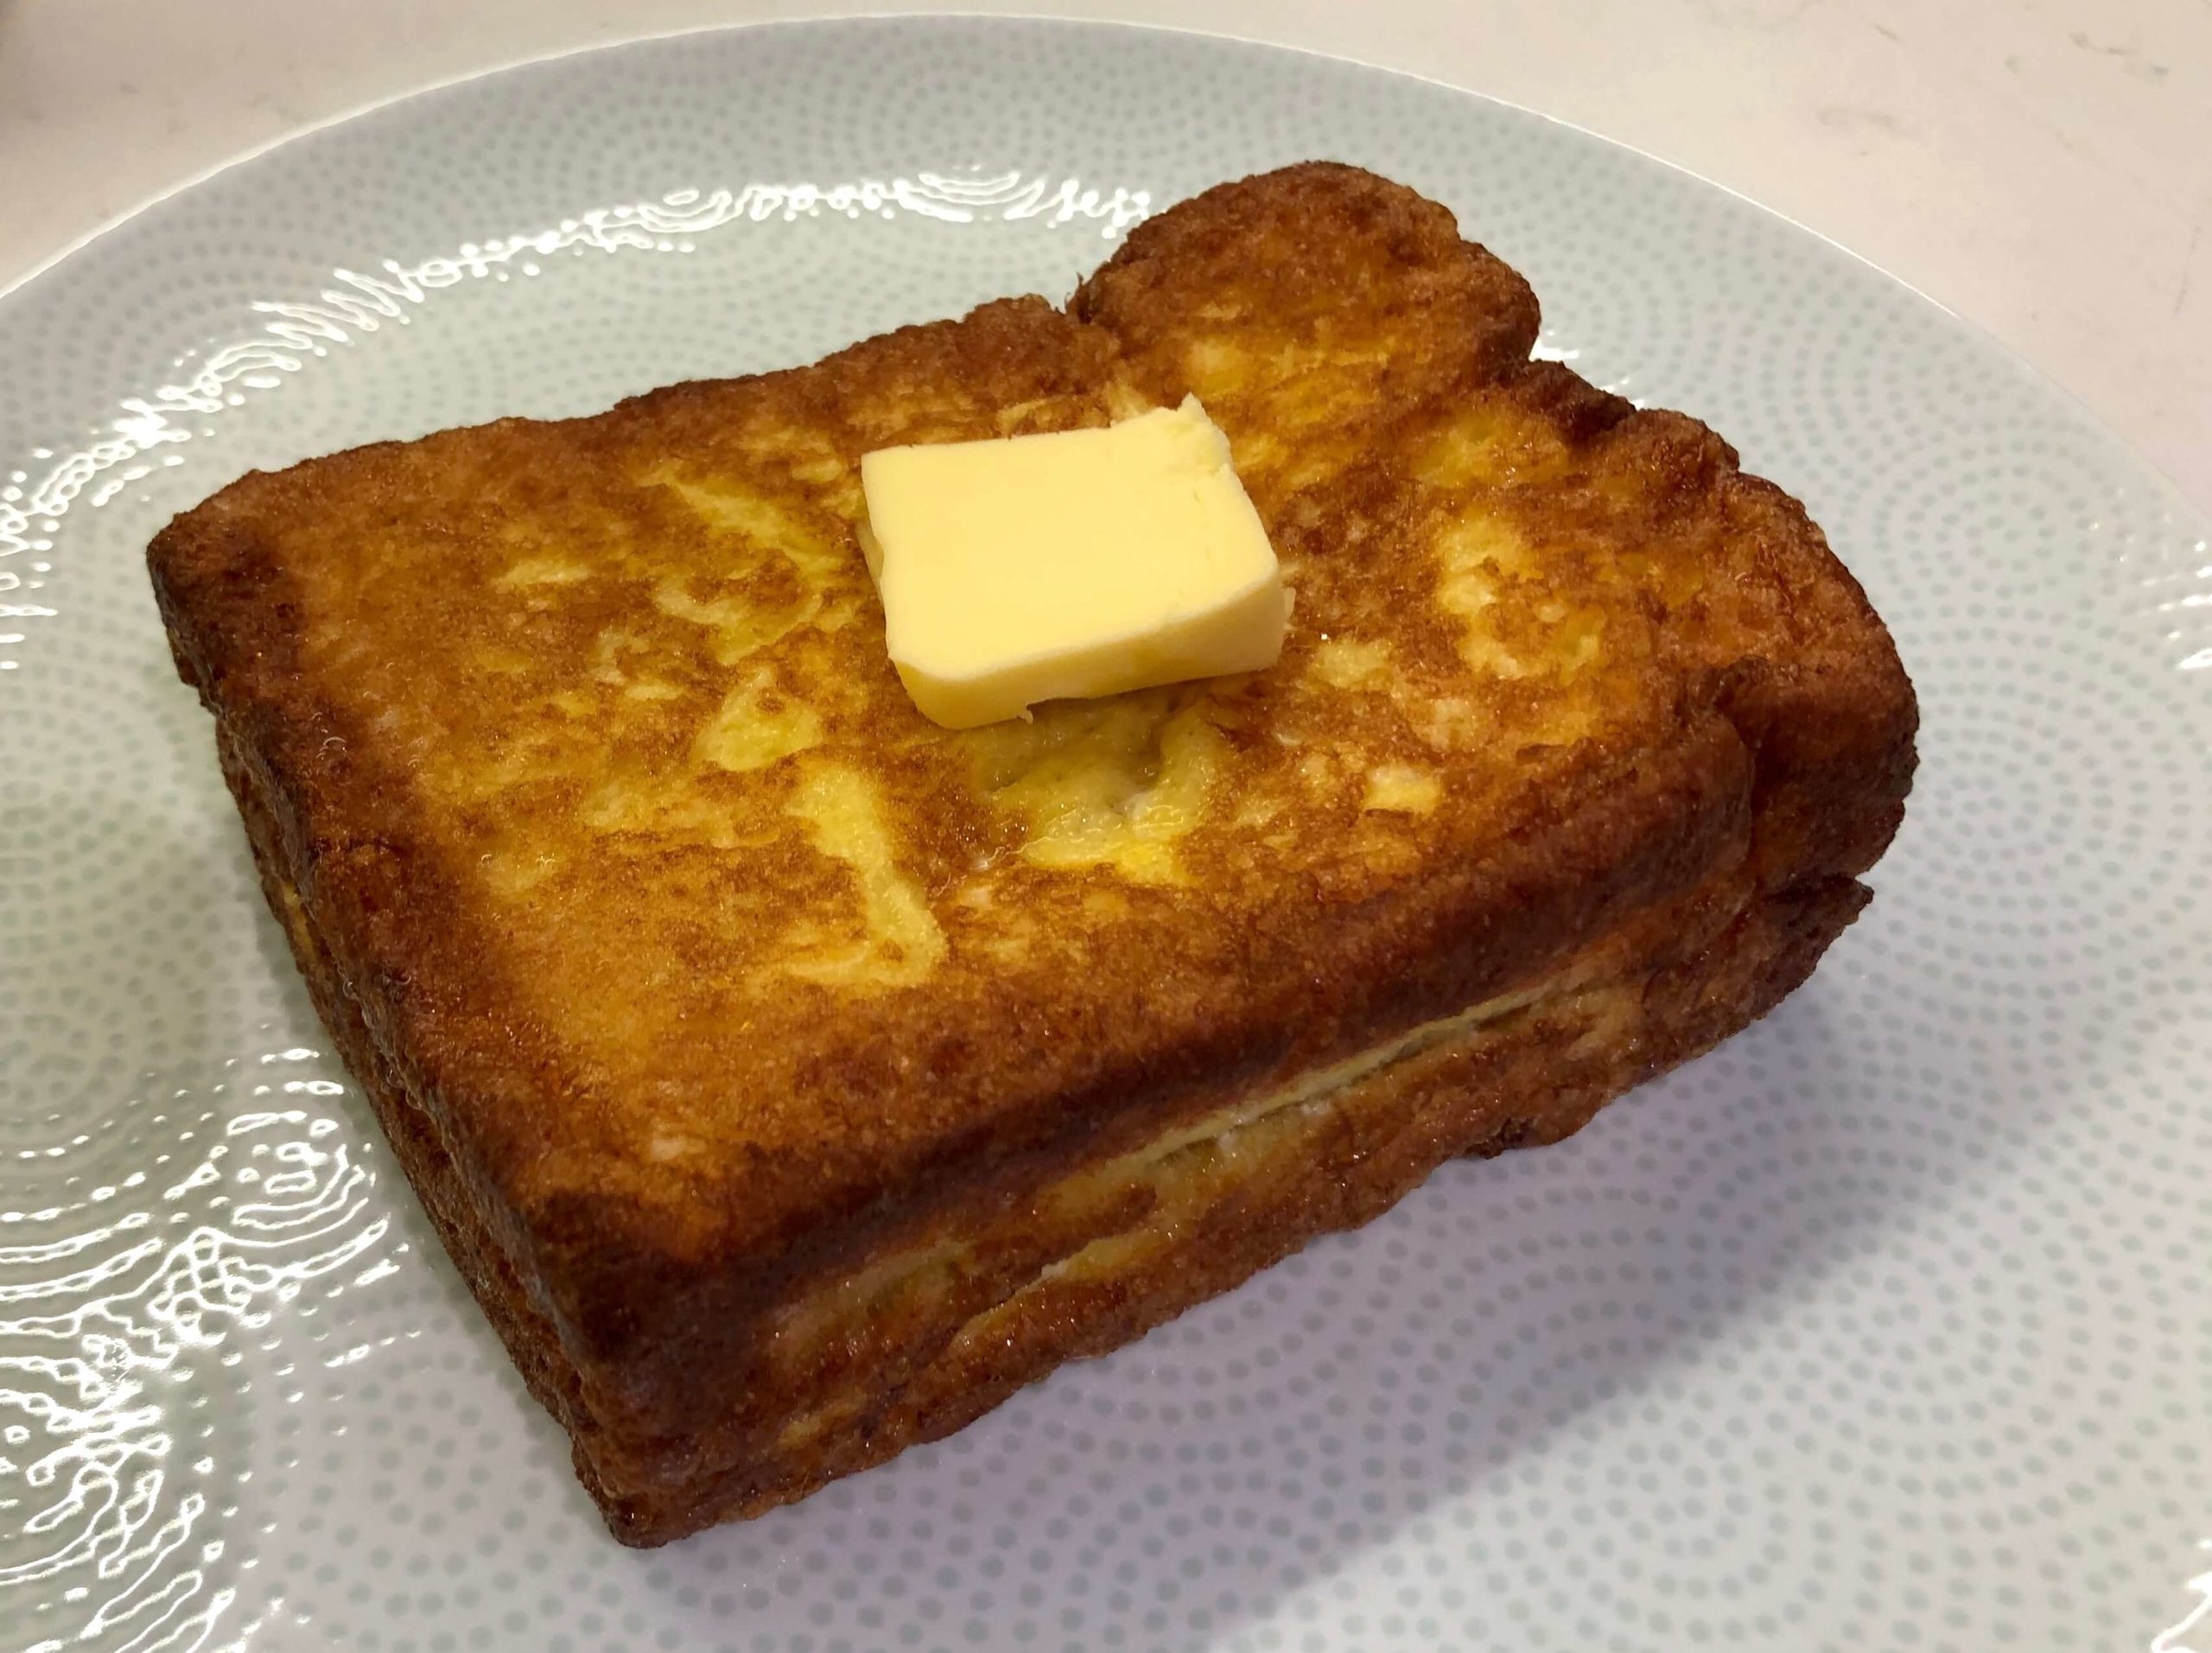 Hong Kong styled French Toast